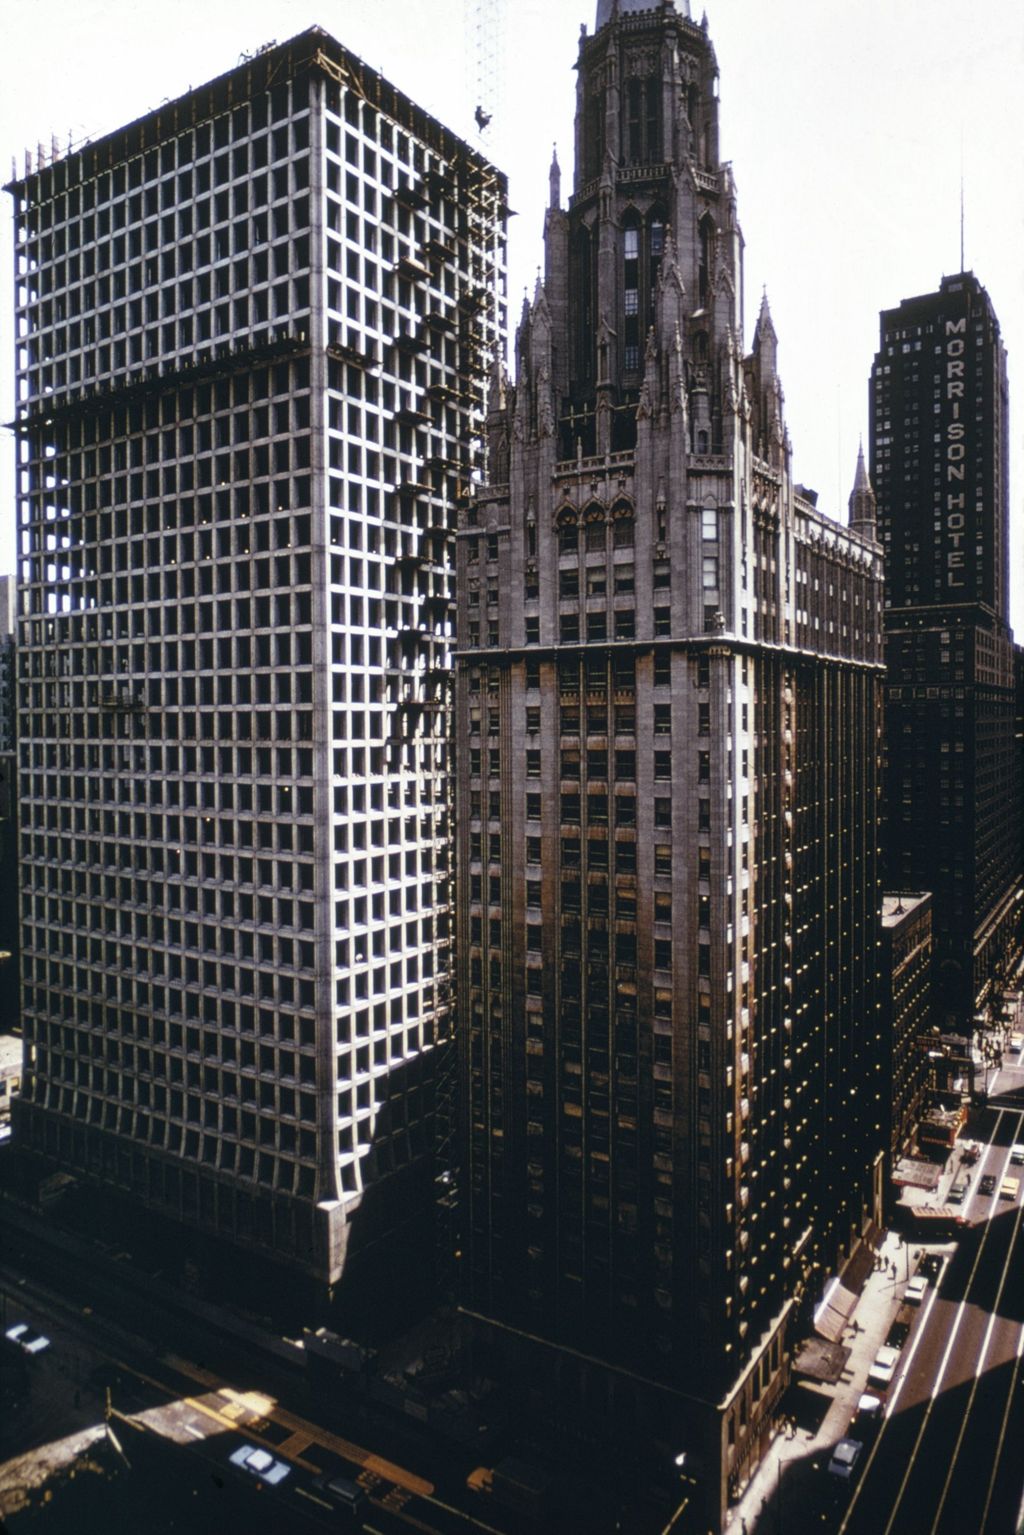 Miniature of Cook County Administration Building and Chicago Temple